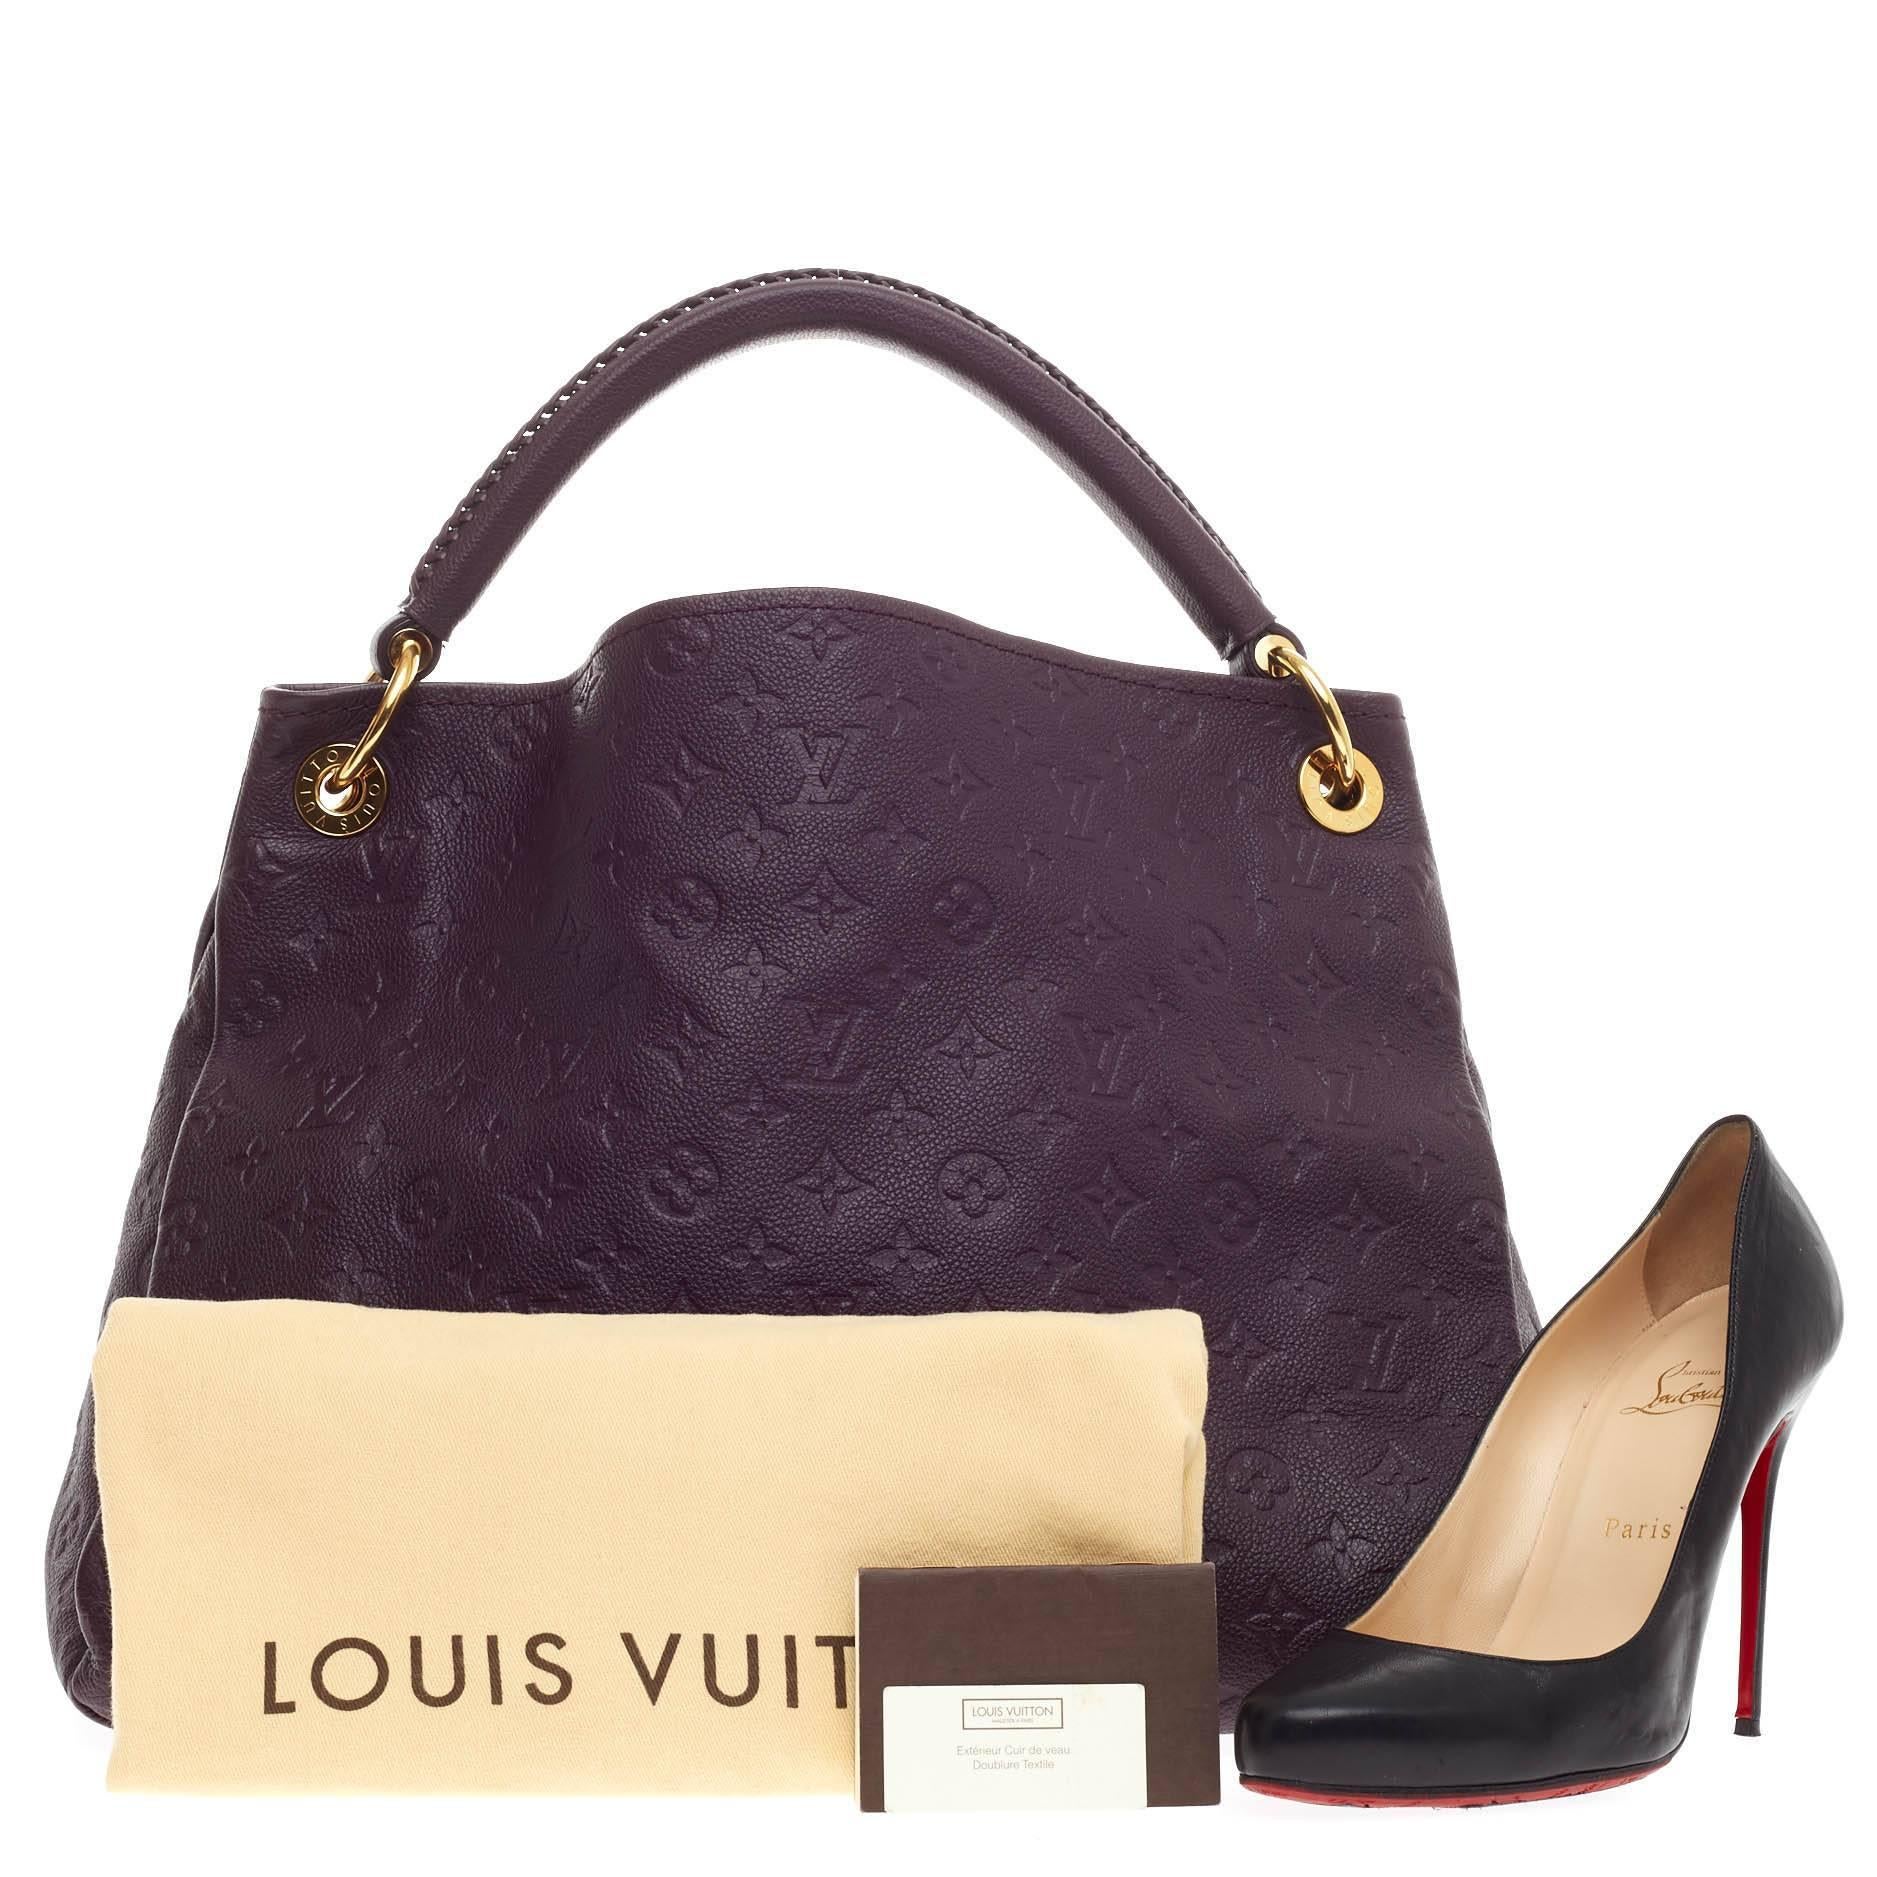 This authentic Louis Vuitton Artsy Monogram Empreinte Leather MM is as elegant as it is sturdy. Crafted in beautiful aube purple embossed leather with subtle LV monogram imprints, this luxurious and refined hobo features a single looped braided top